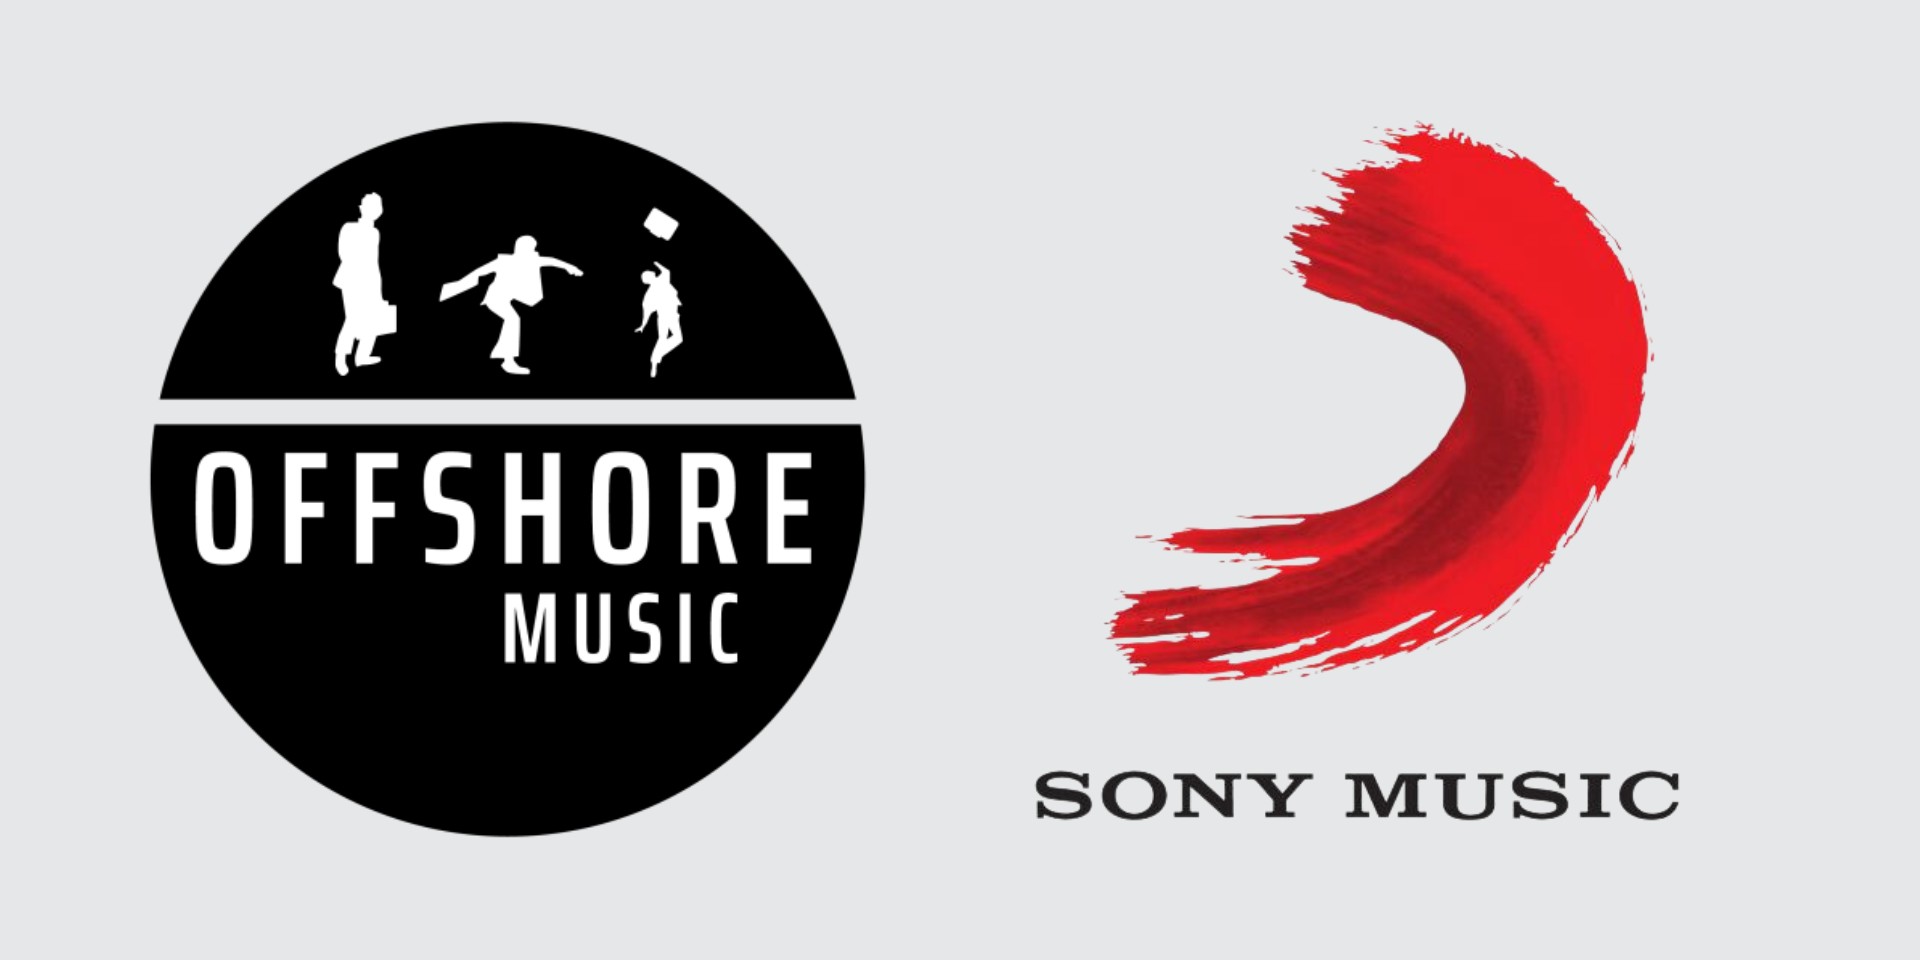 Ely Buendia's Offshore Music partners with Sony Music Philippines – " This is the start of a fresh new era for the Filipino
music scene."